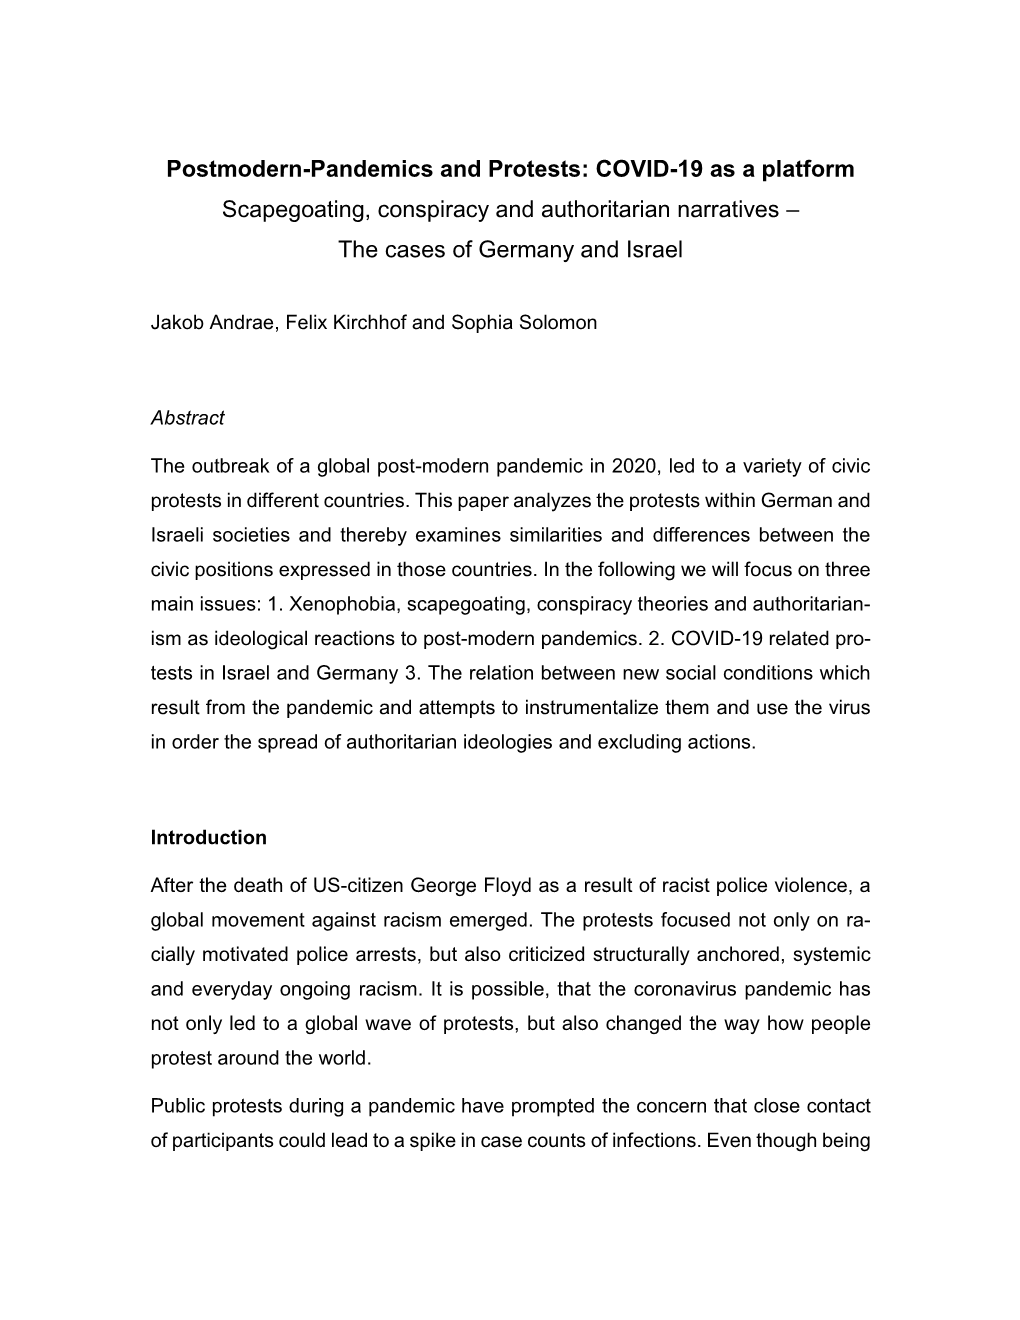 Postmodern-Pandemics and Protests: COVID-19 As a Platform Scapegoating, Conspiracy and Authoritarian Narratives – the Cases of Germany and Israel